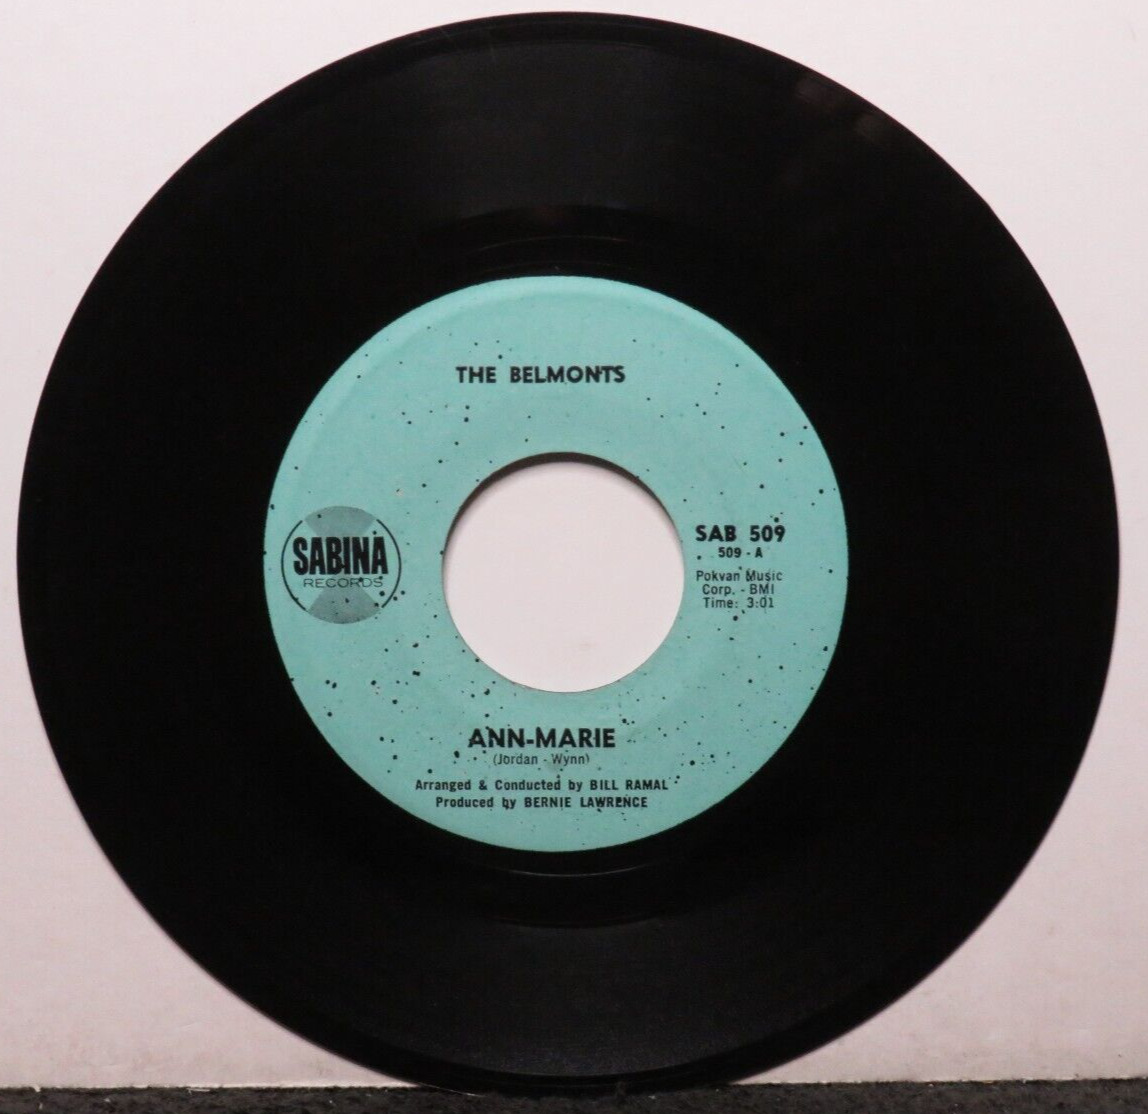 THE BELMONTS ANN-MARIE/AC-CENT-TCHU-ATE THE POSITIVE (VG+) SAB-509 45 RECORD